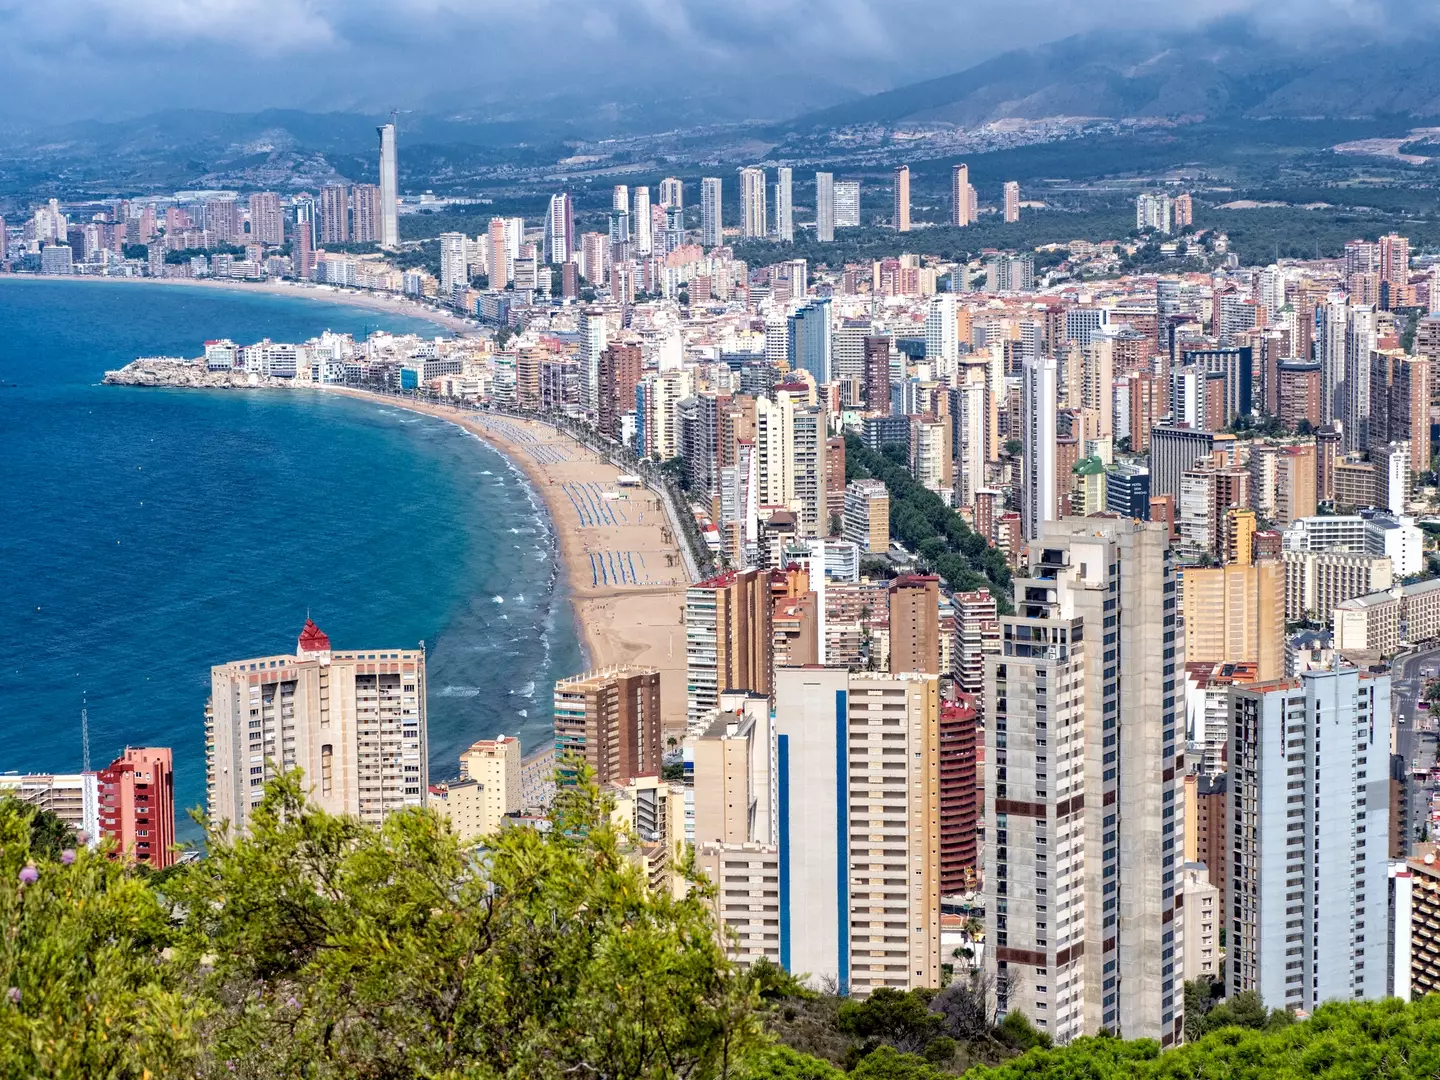 Benidorm from high up (Getty Stock Images)